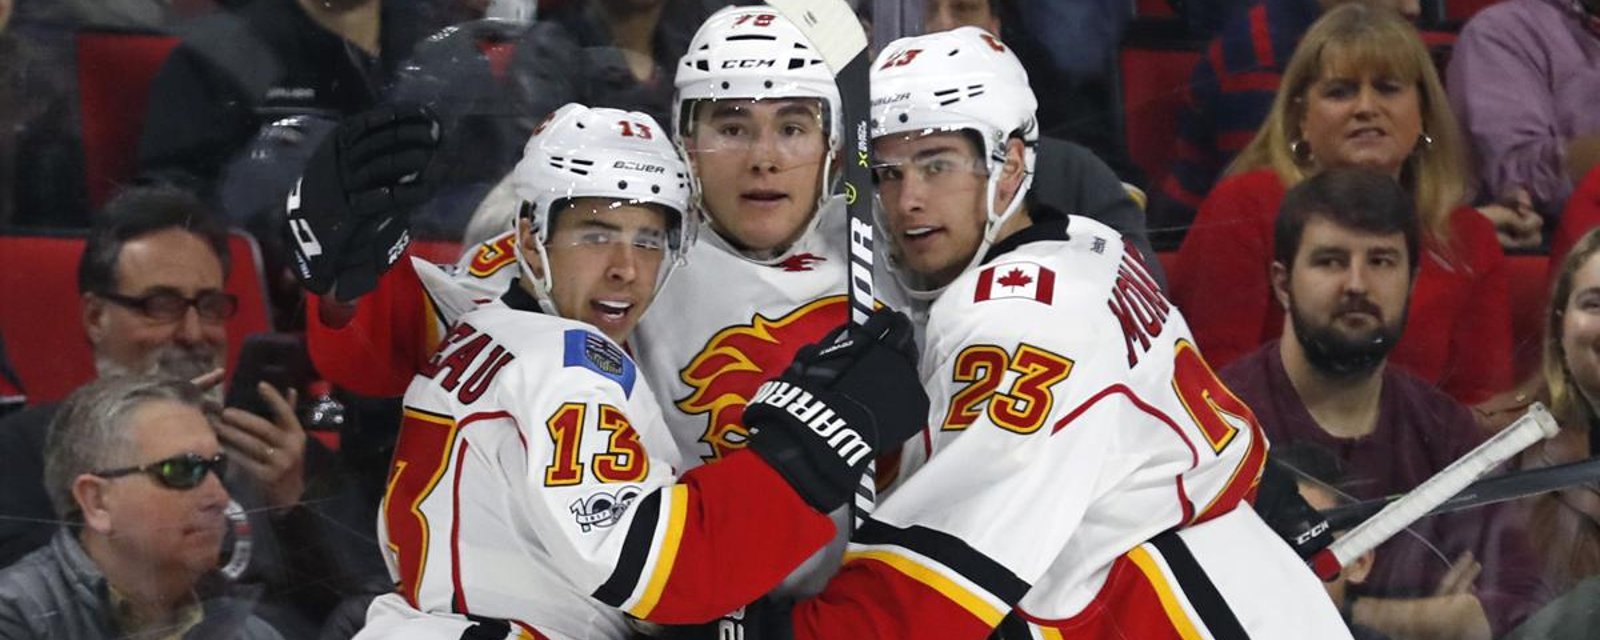 The redemption story of Micheal Ferland.